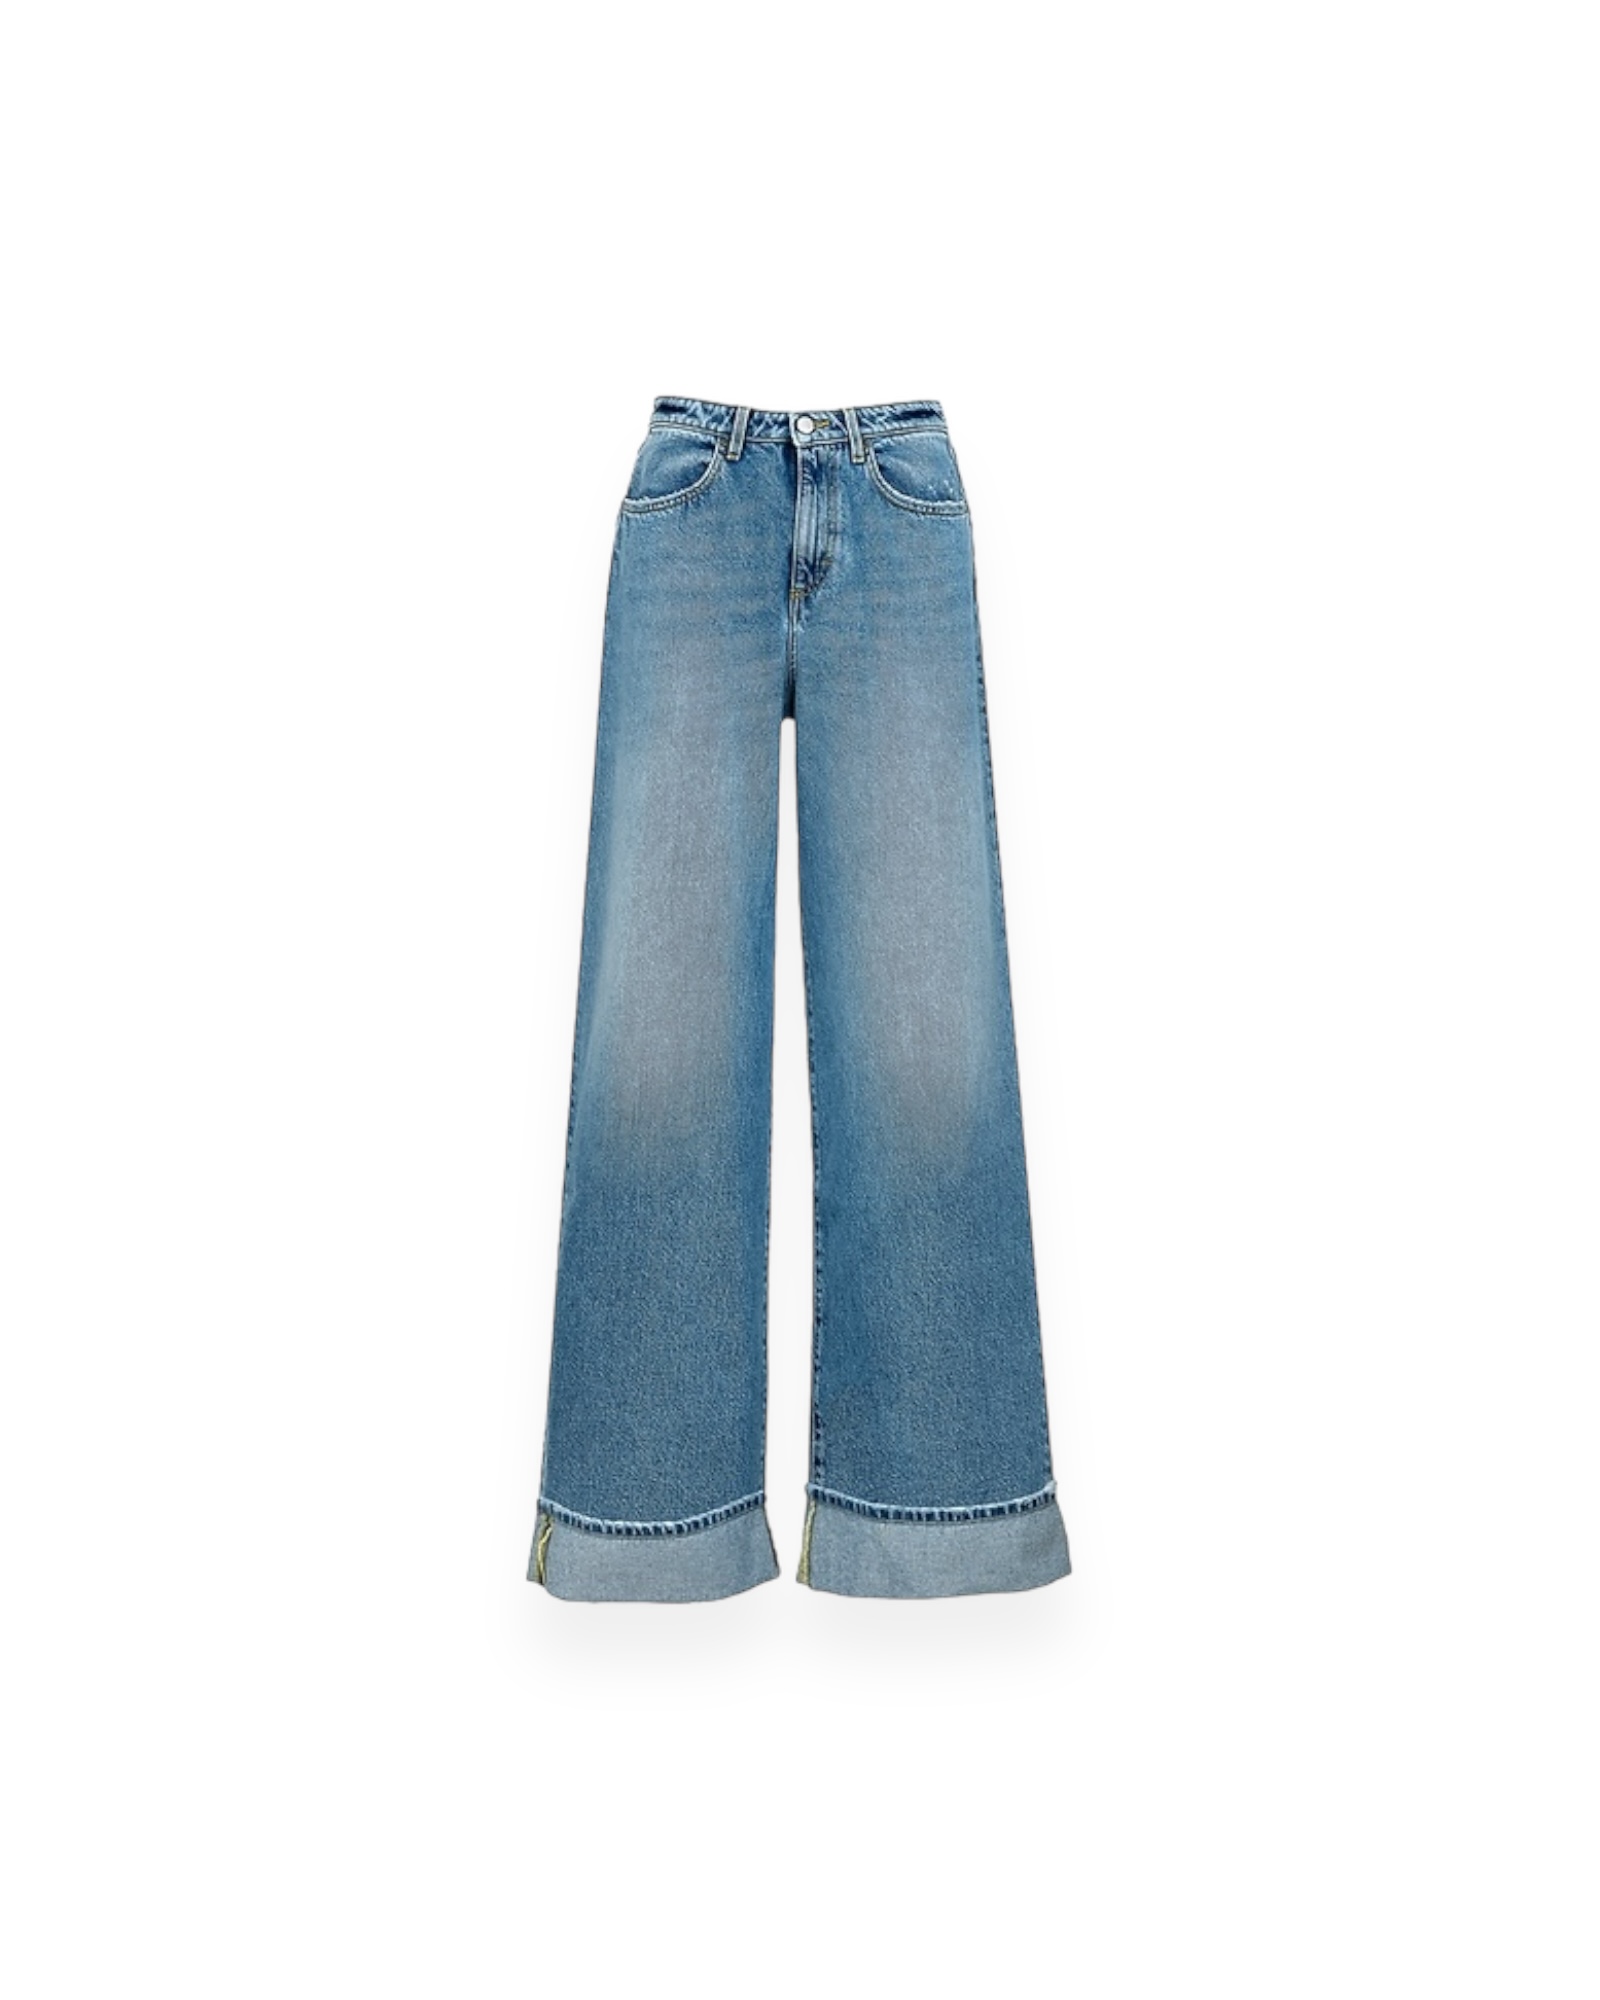 Jeans Nicole in washed blue, ICON DENIM,